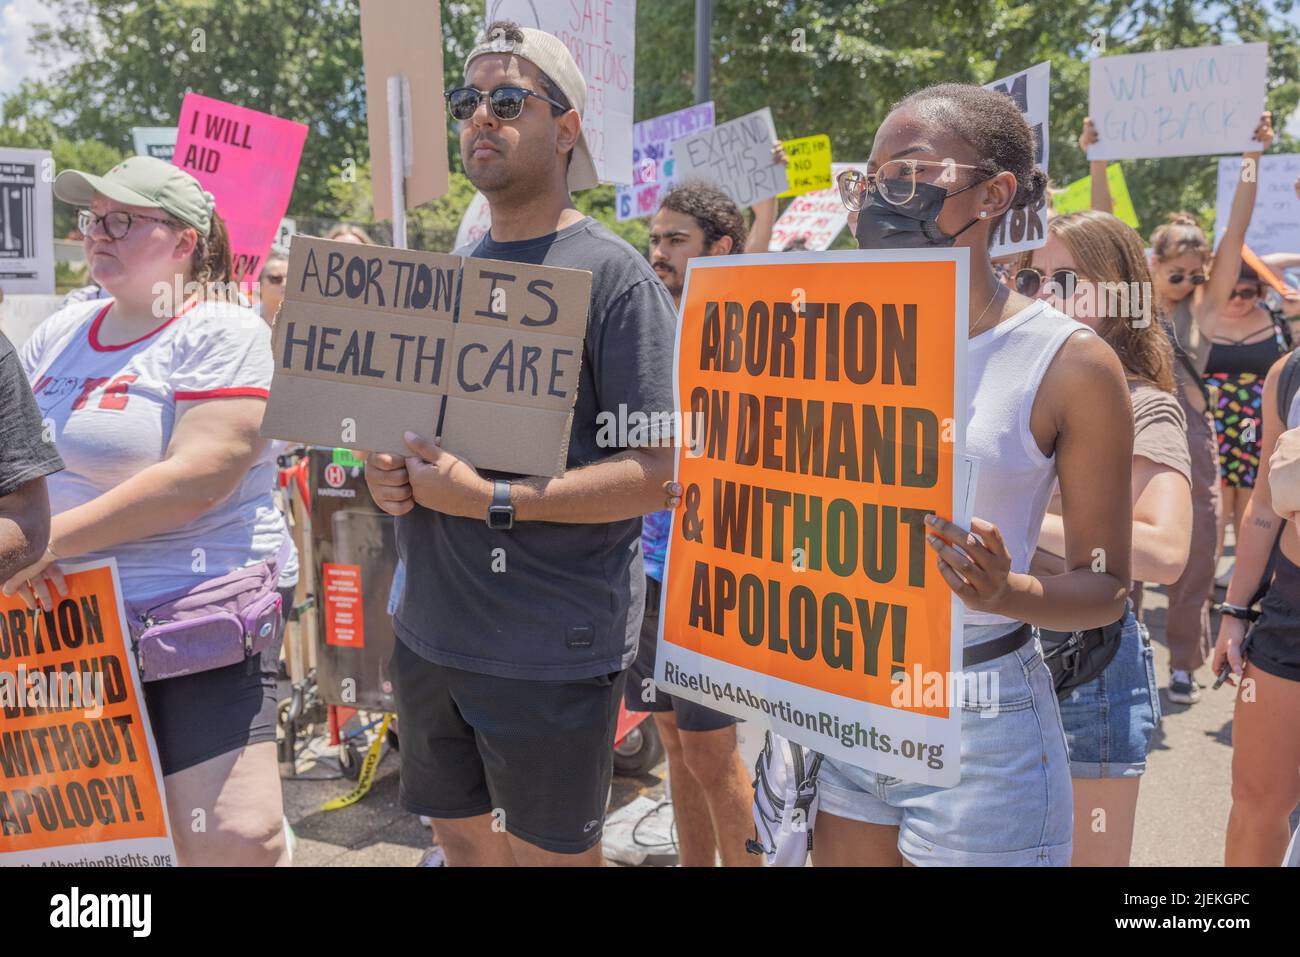 WASHINGTON, D.C. – June 25, 2022: Abortion rights demonstrators rally near the United States Supreme Court. Stock Photo